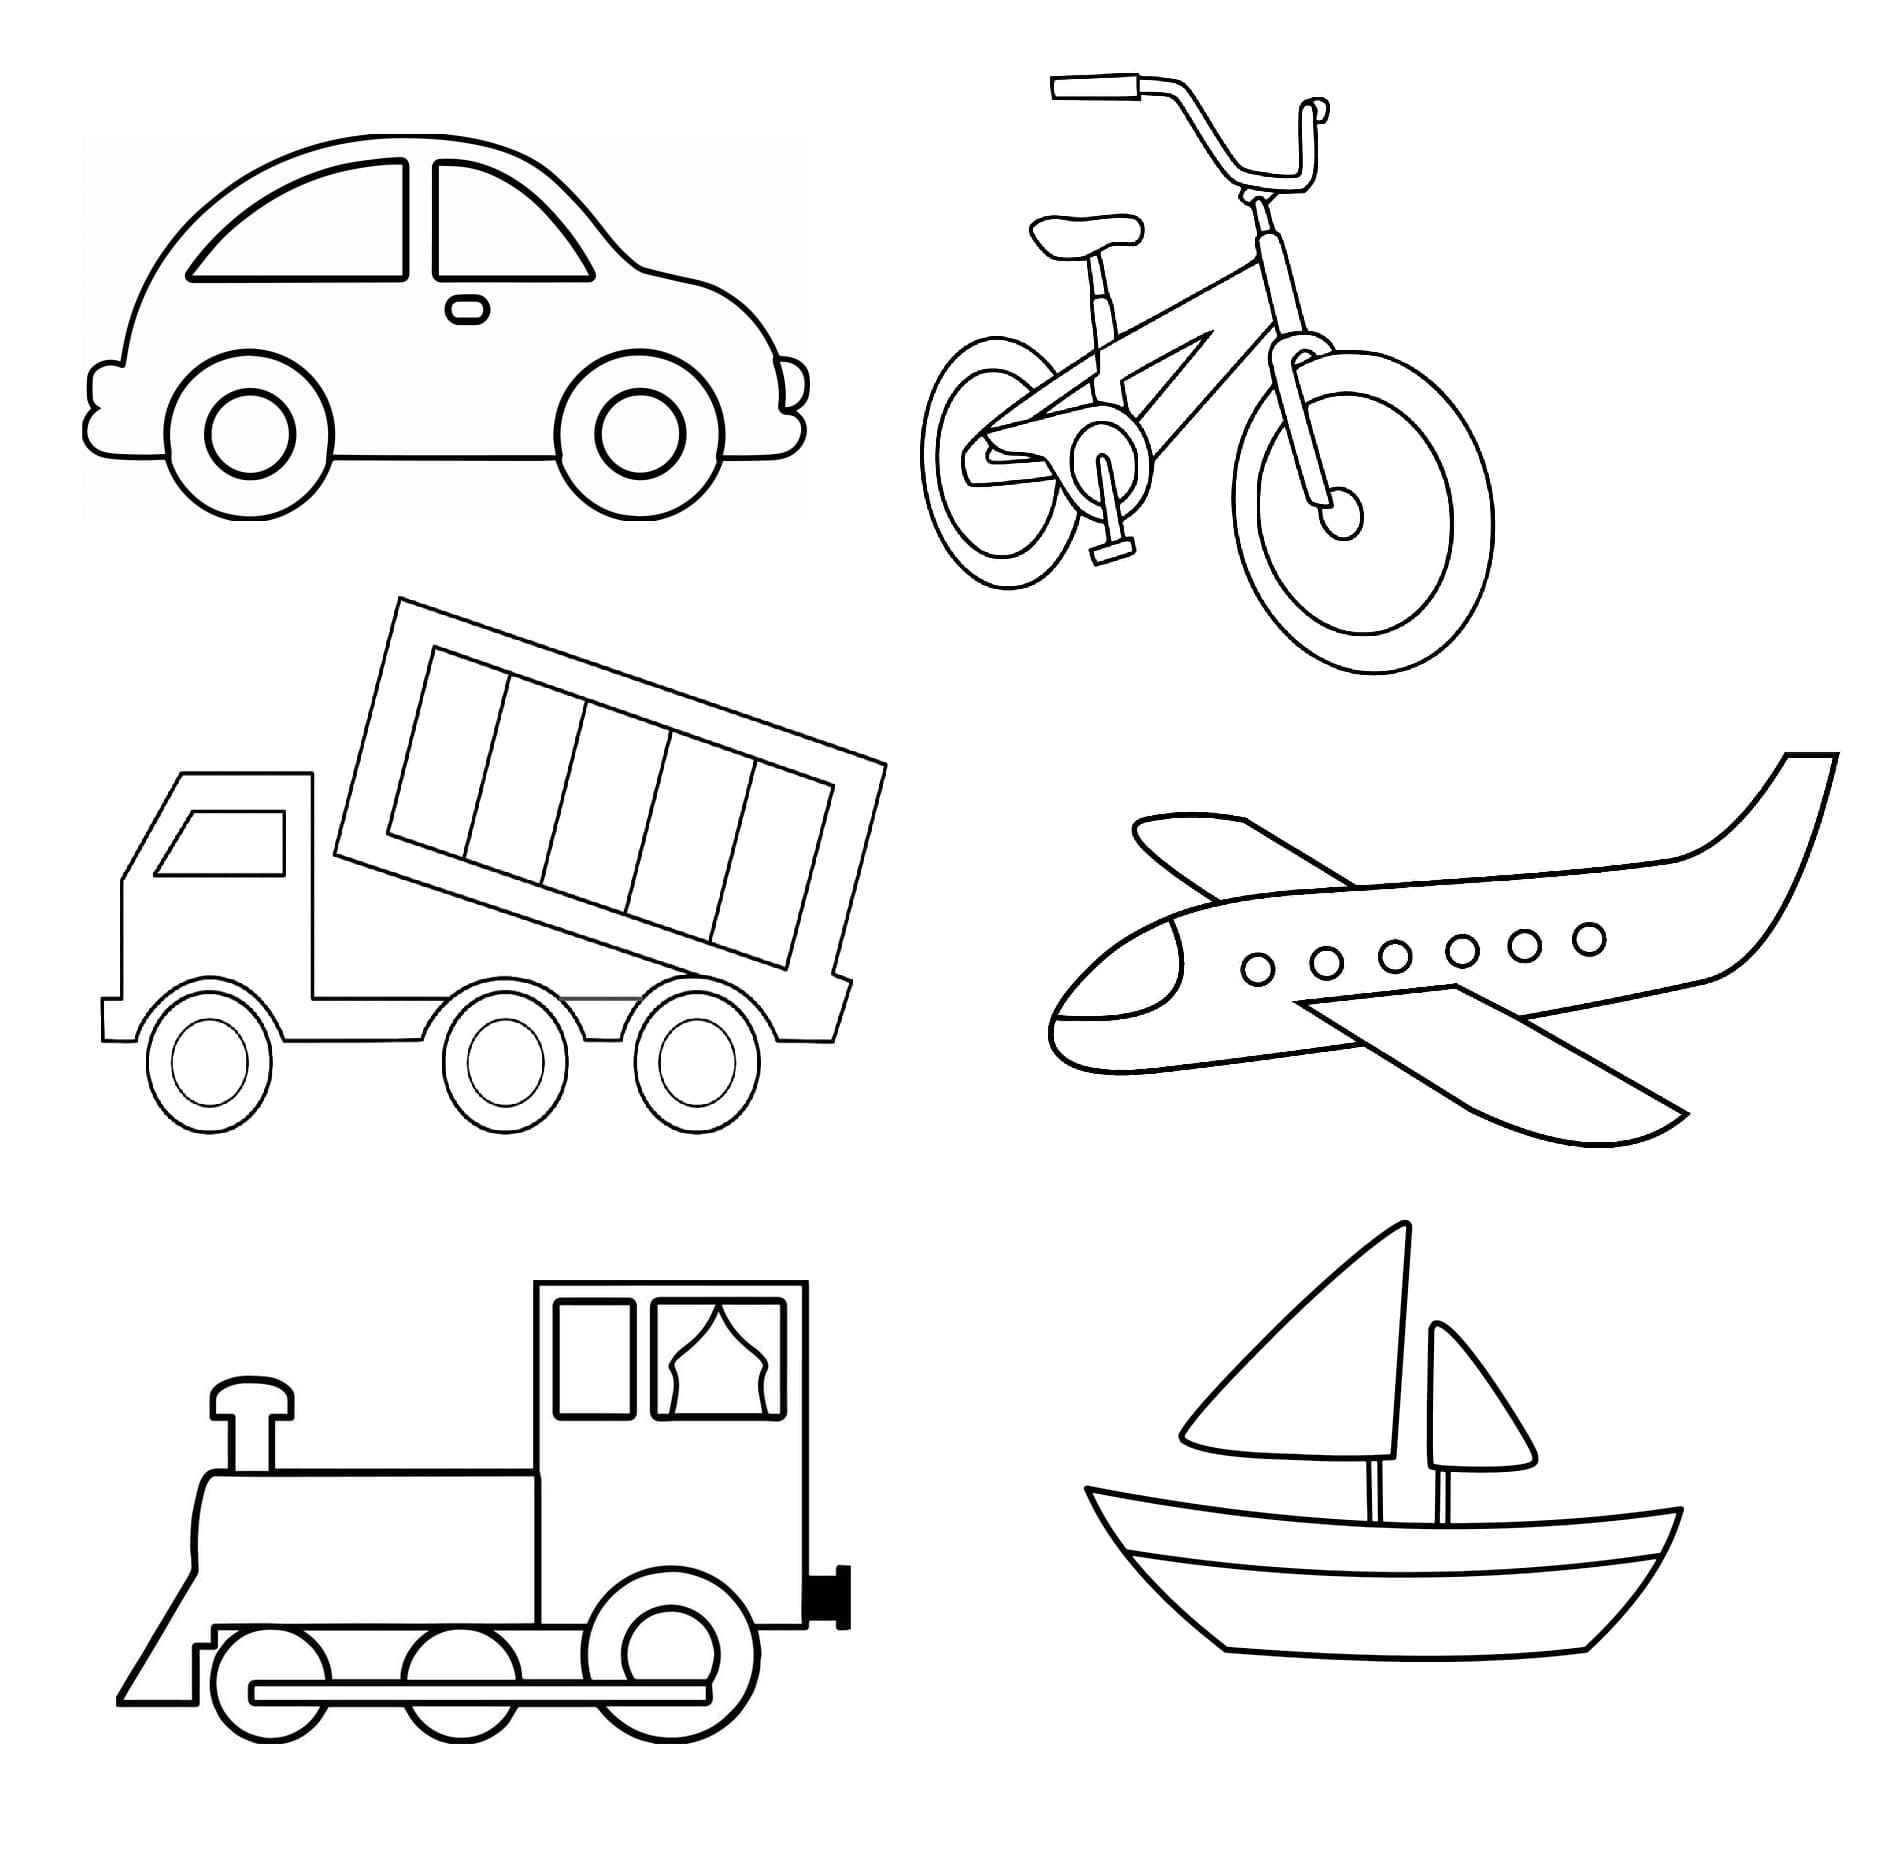 Simple vehicles coloring page